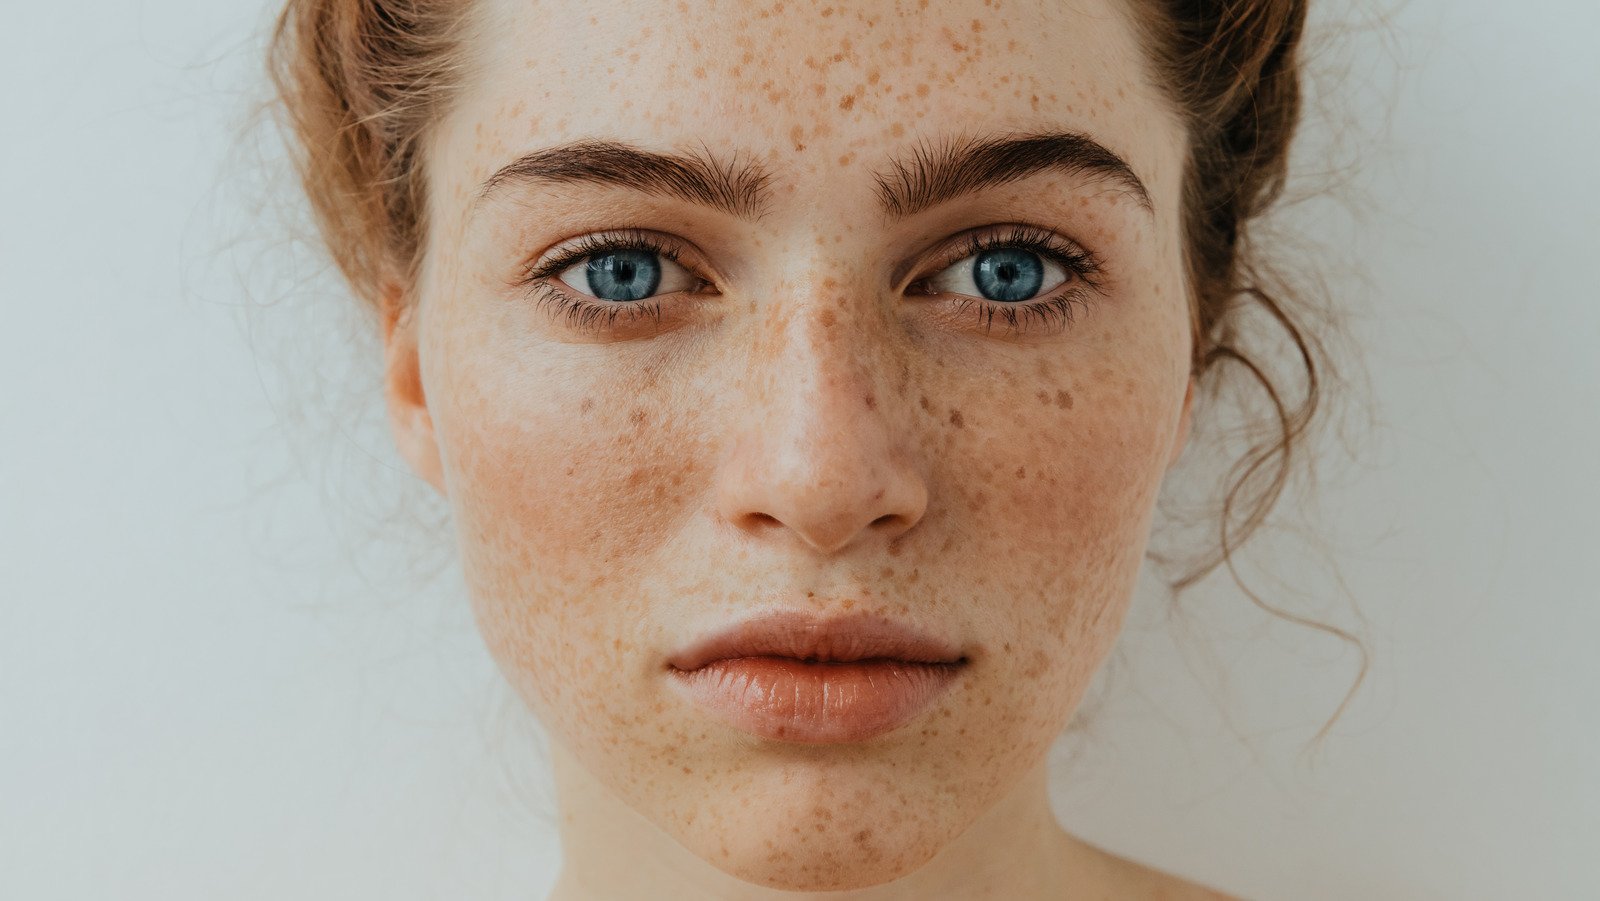 Moles Vs Freckles: What's The Difference? - Health Digest